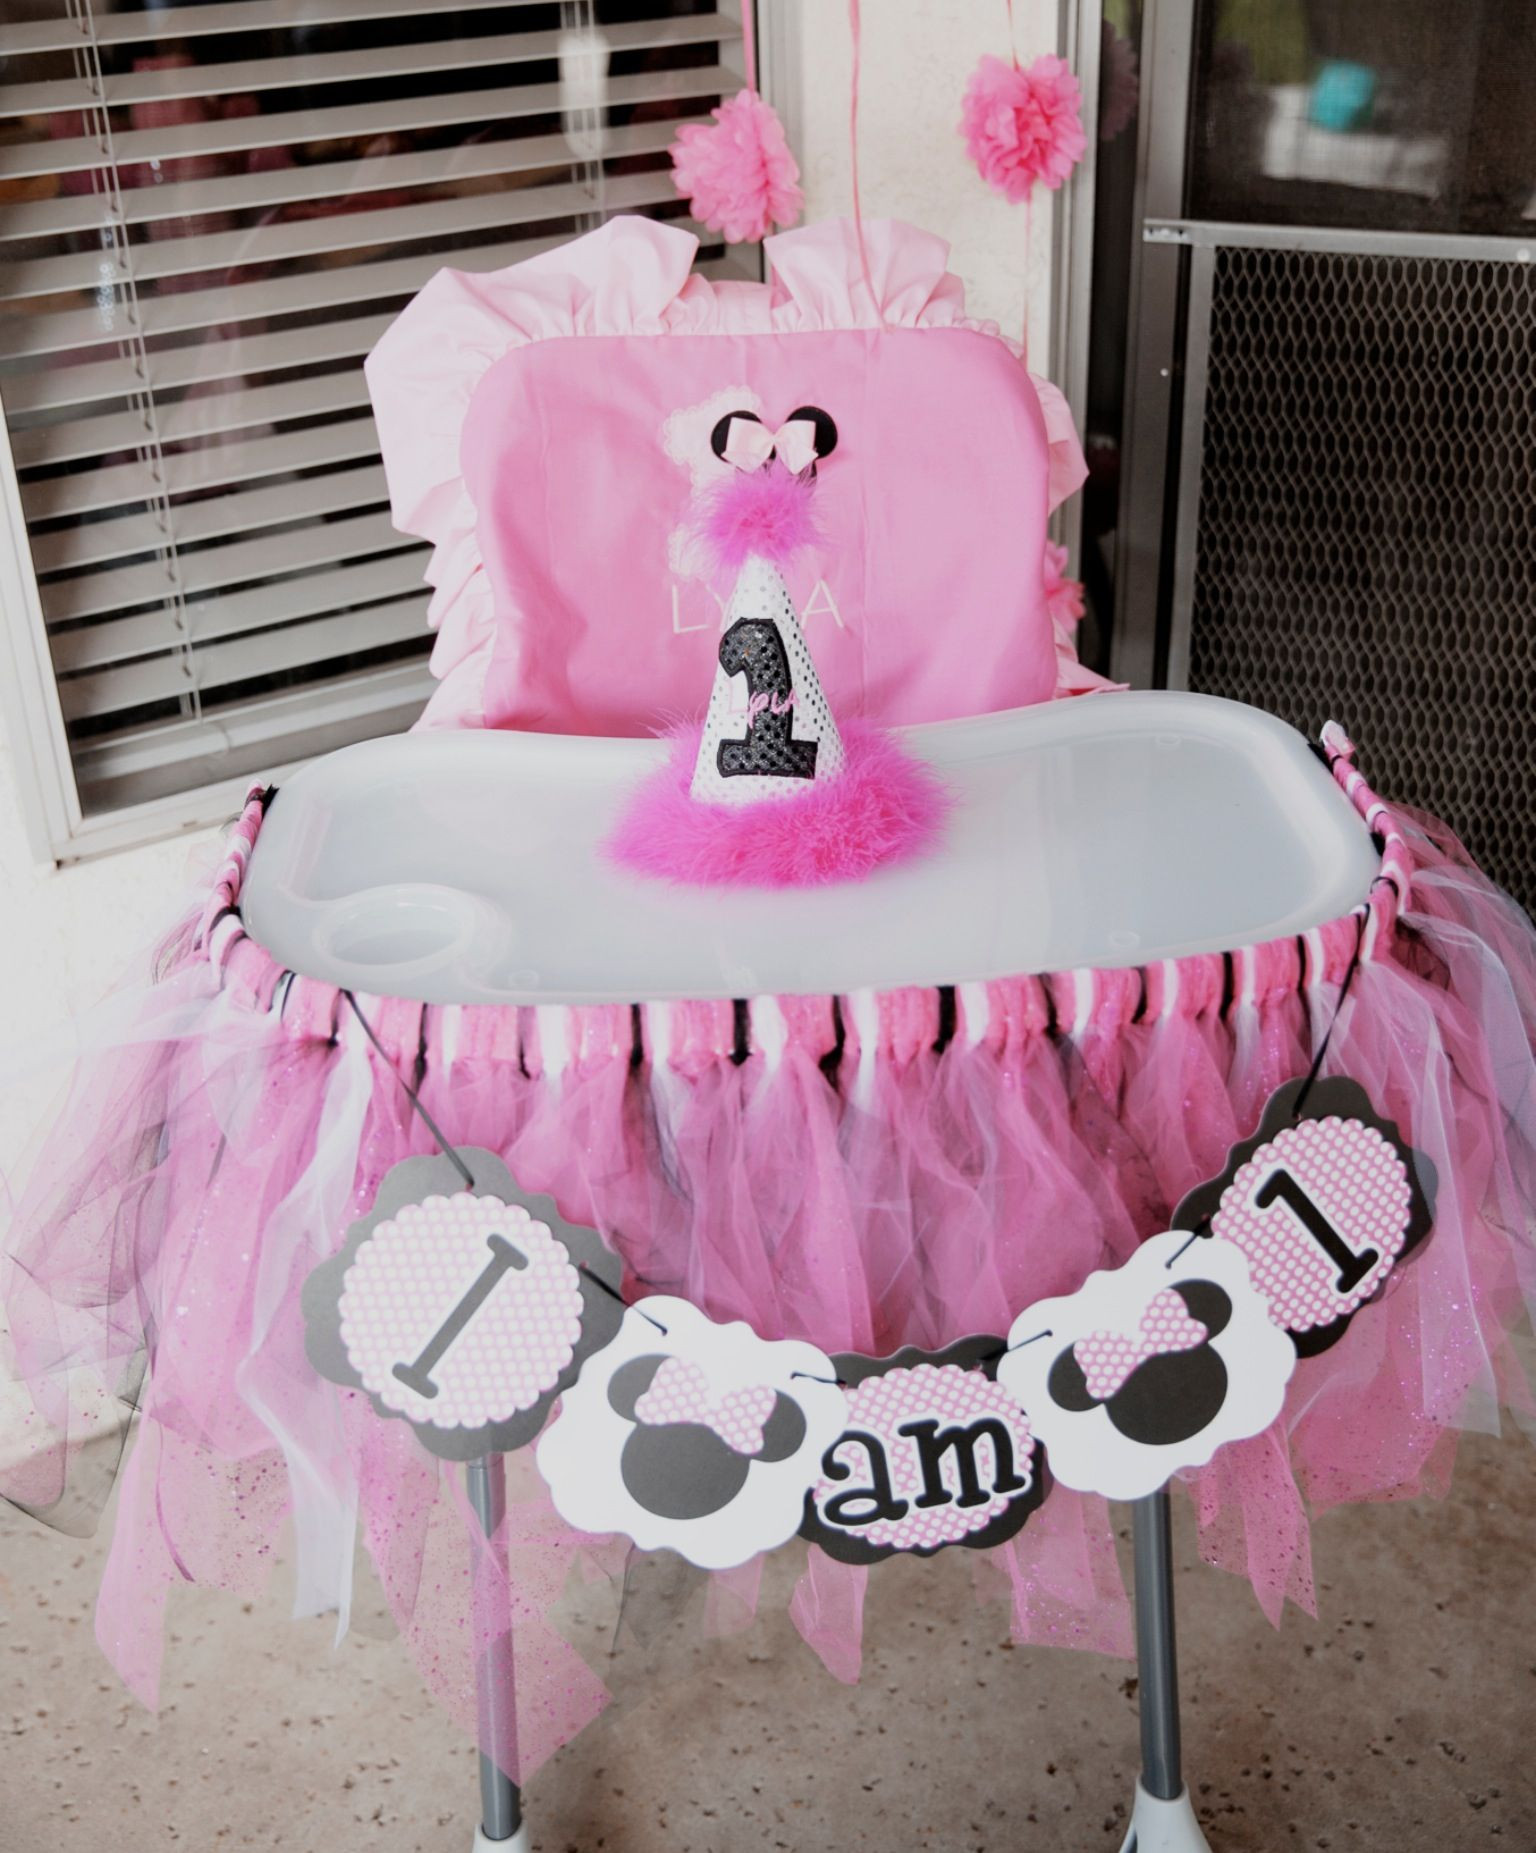 Minnie Mouse 1st Birthday Party Decorations
 Minnie Mouse high chair I am one first birthday Minnie